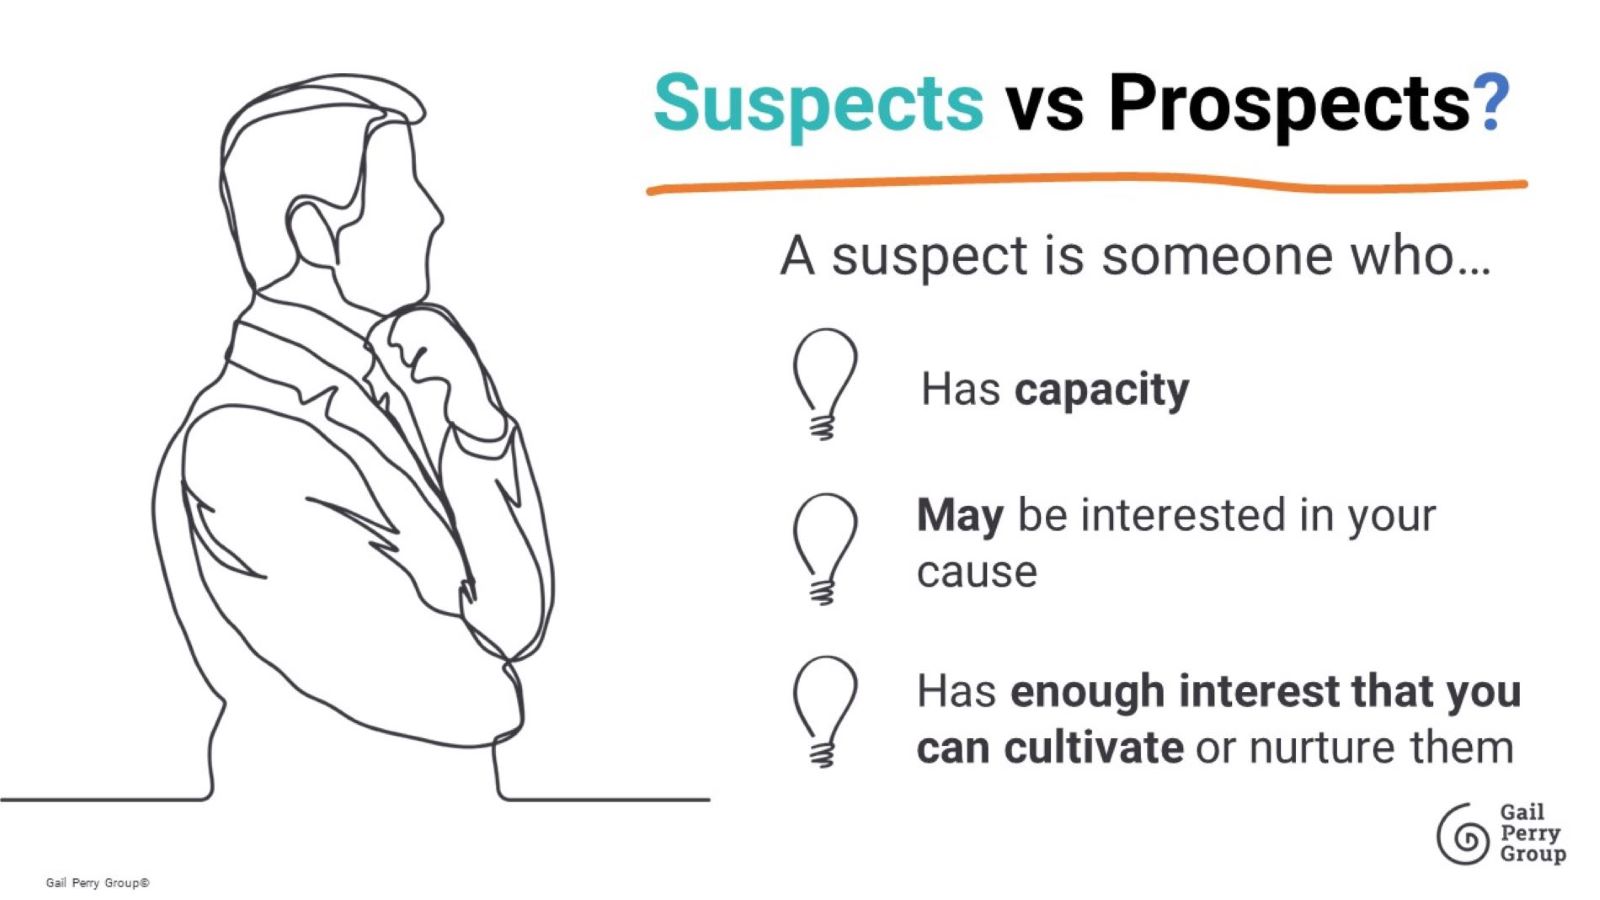 Suspects vs Prospects